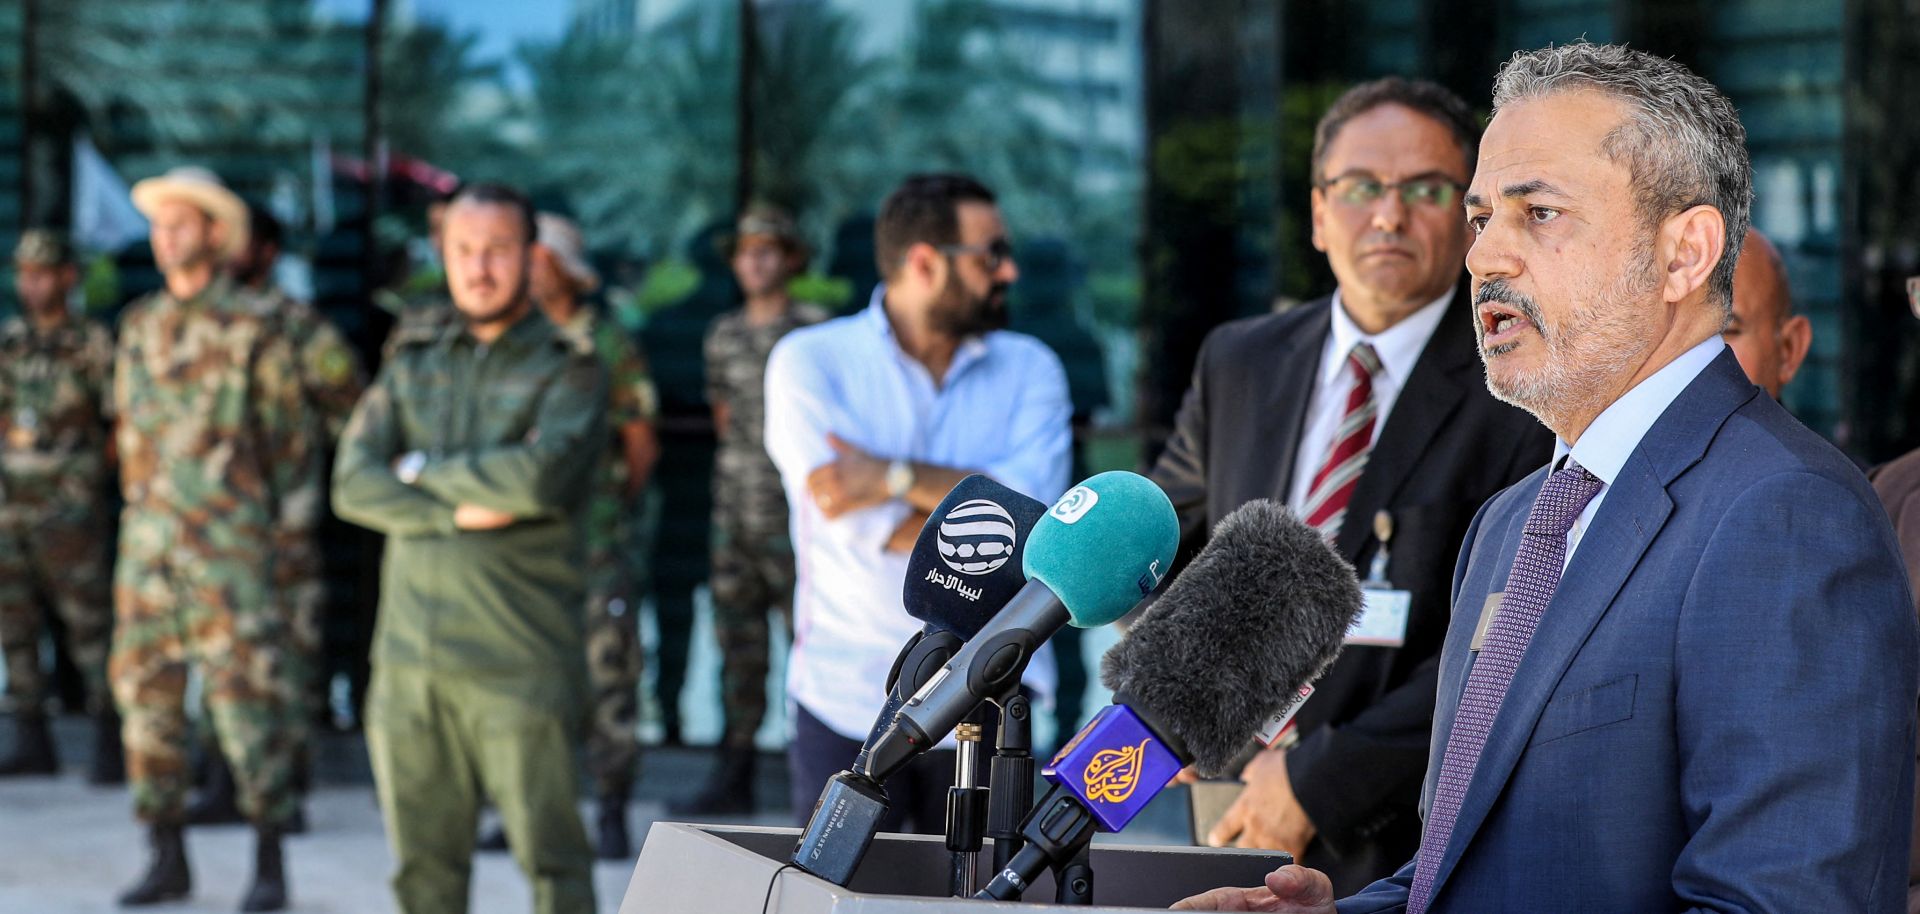 Farhat Bengdara, the new chief of Libya's National Oil Corporation appointed by Prime Minister Abdulhamid Dbeibah, gives a press conference outside the company’s headquarters in Tripoli on July 14, 2022.